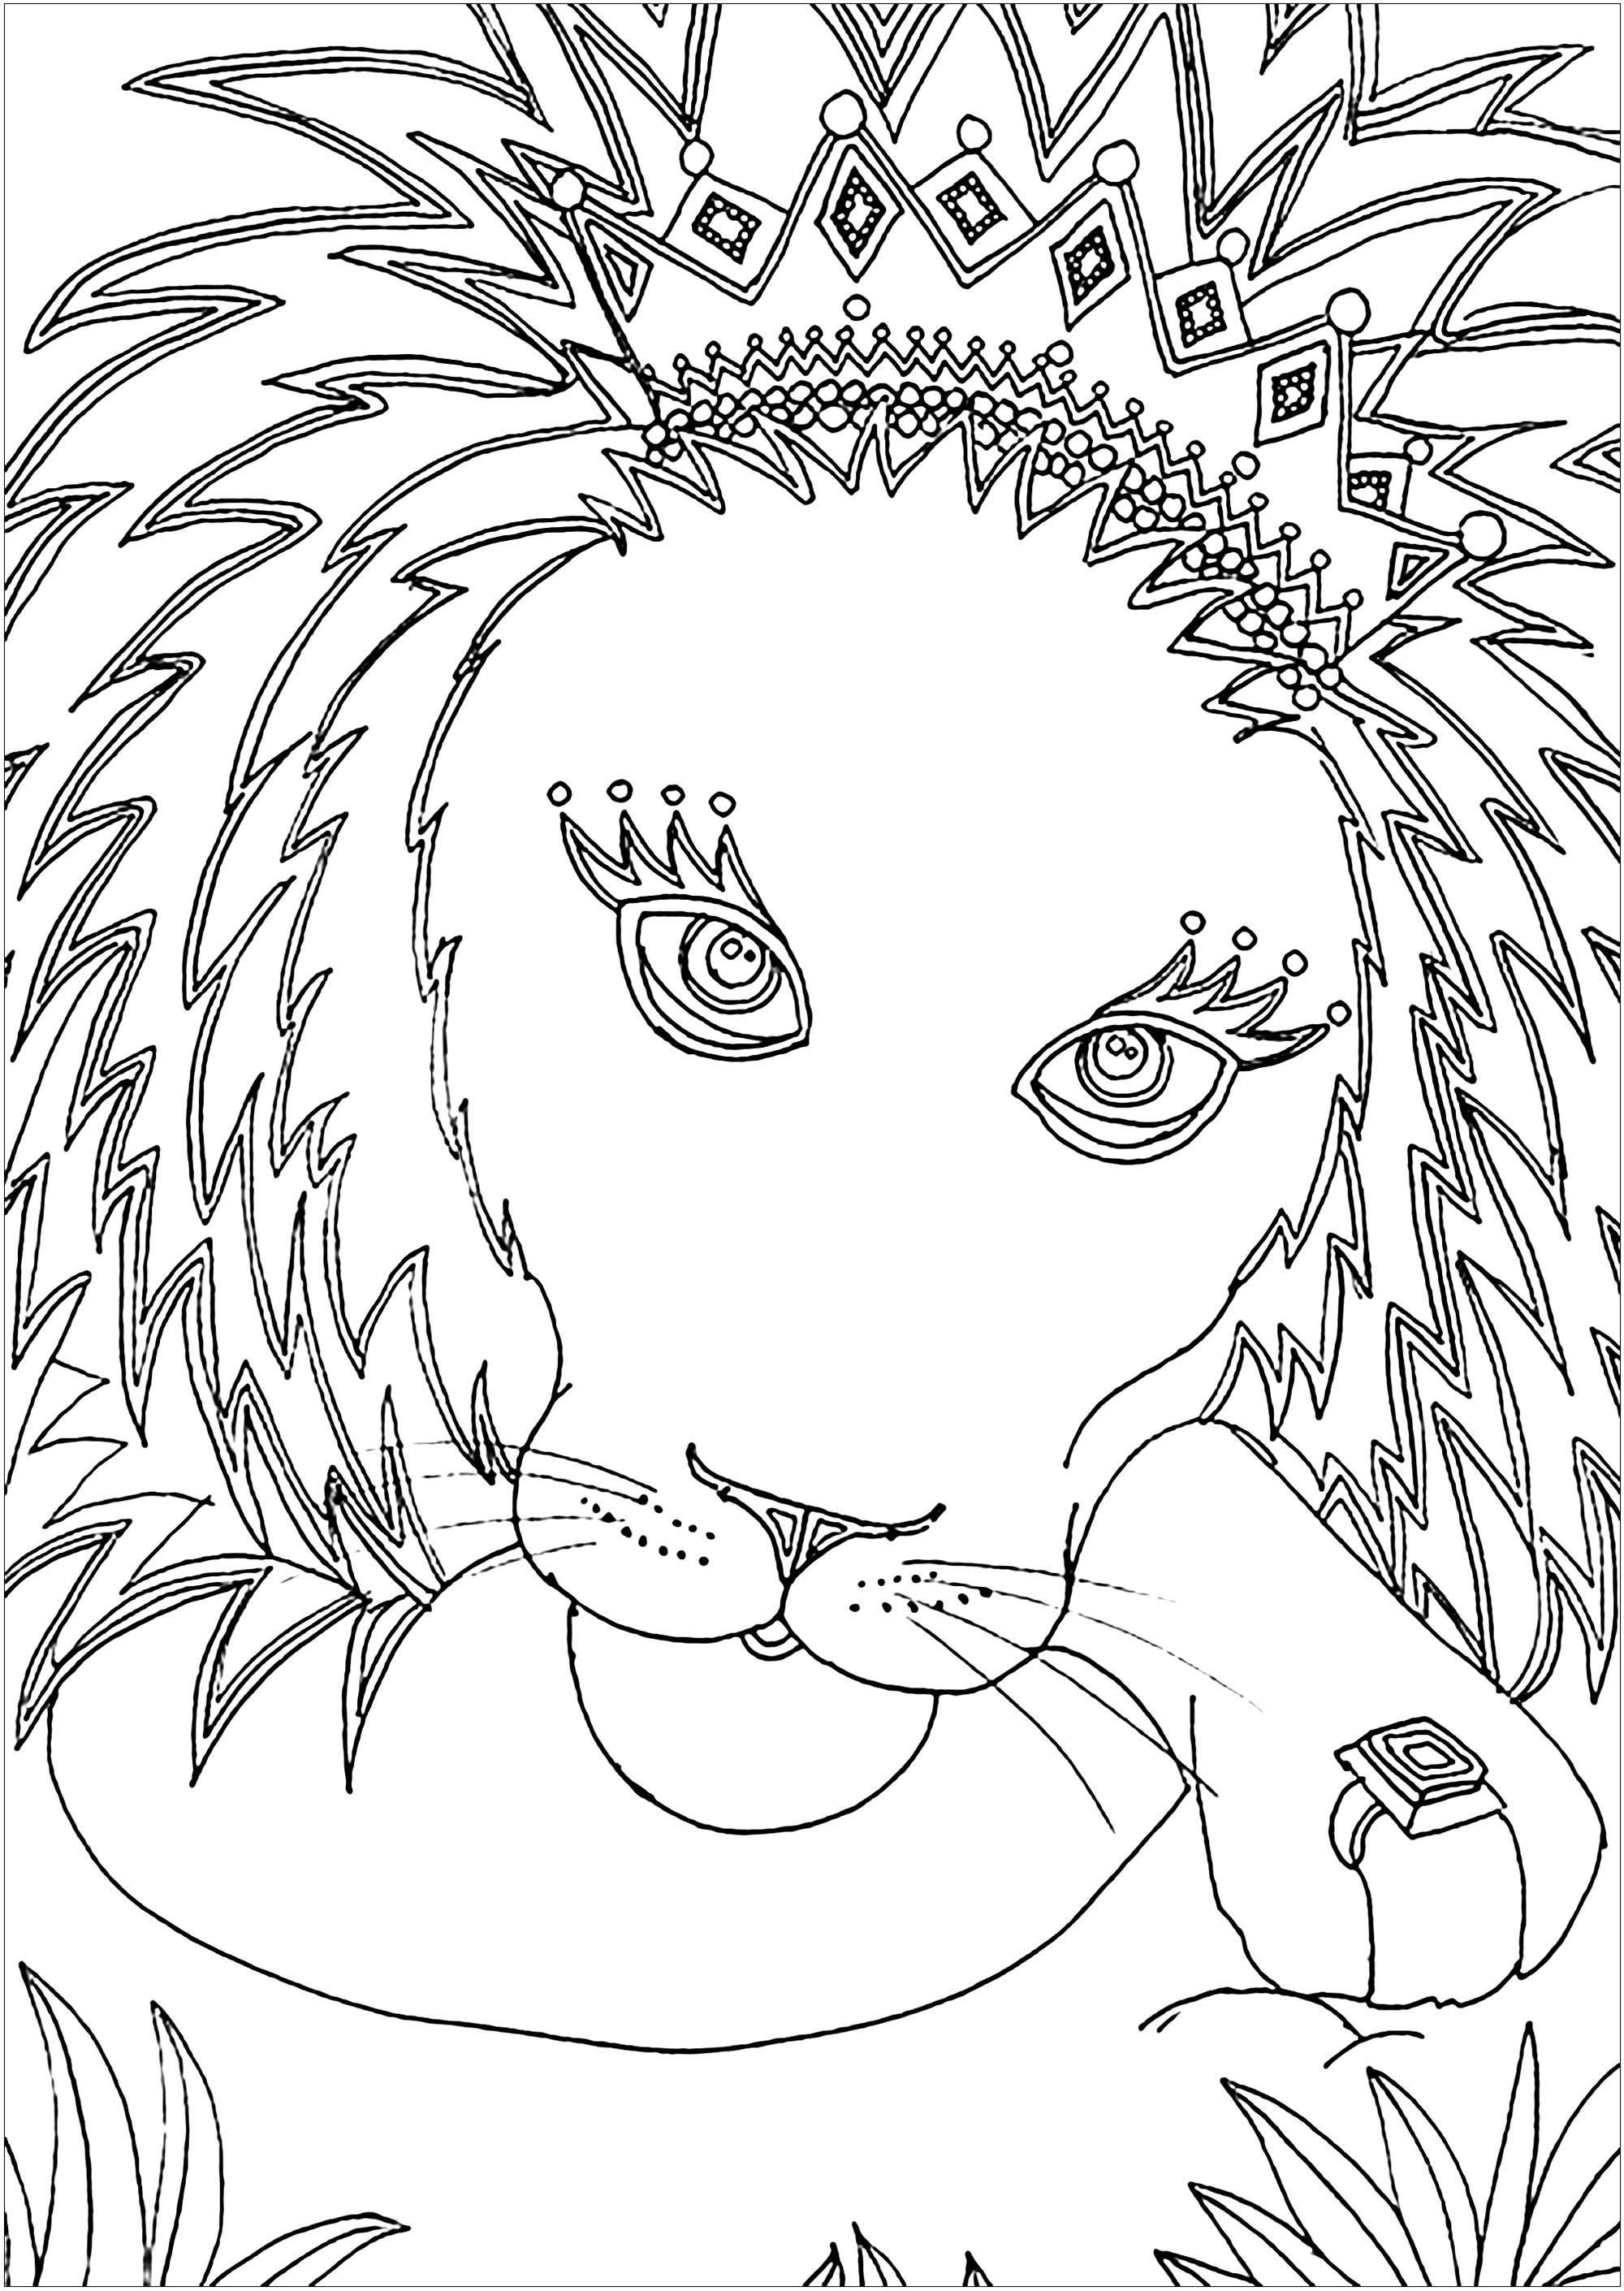 miscellaneous-circus-print-coloring-pages-lion-coloring-pages-my-xxx